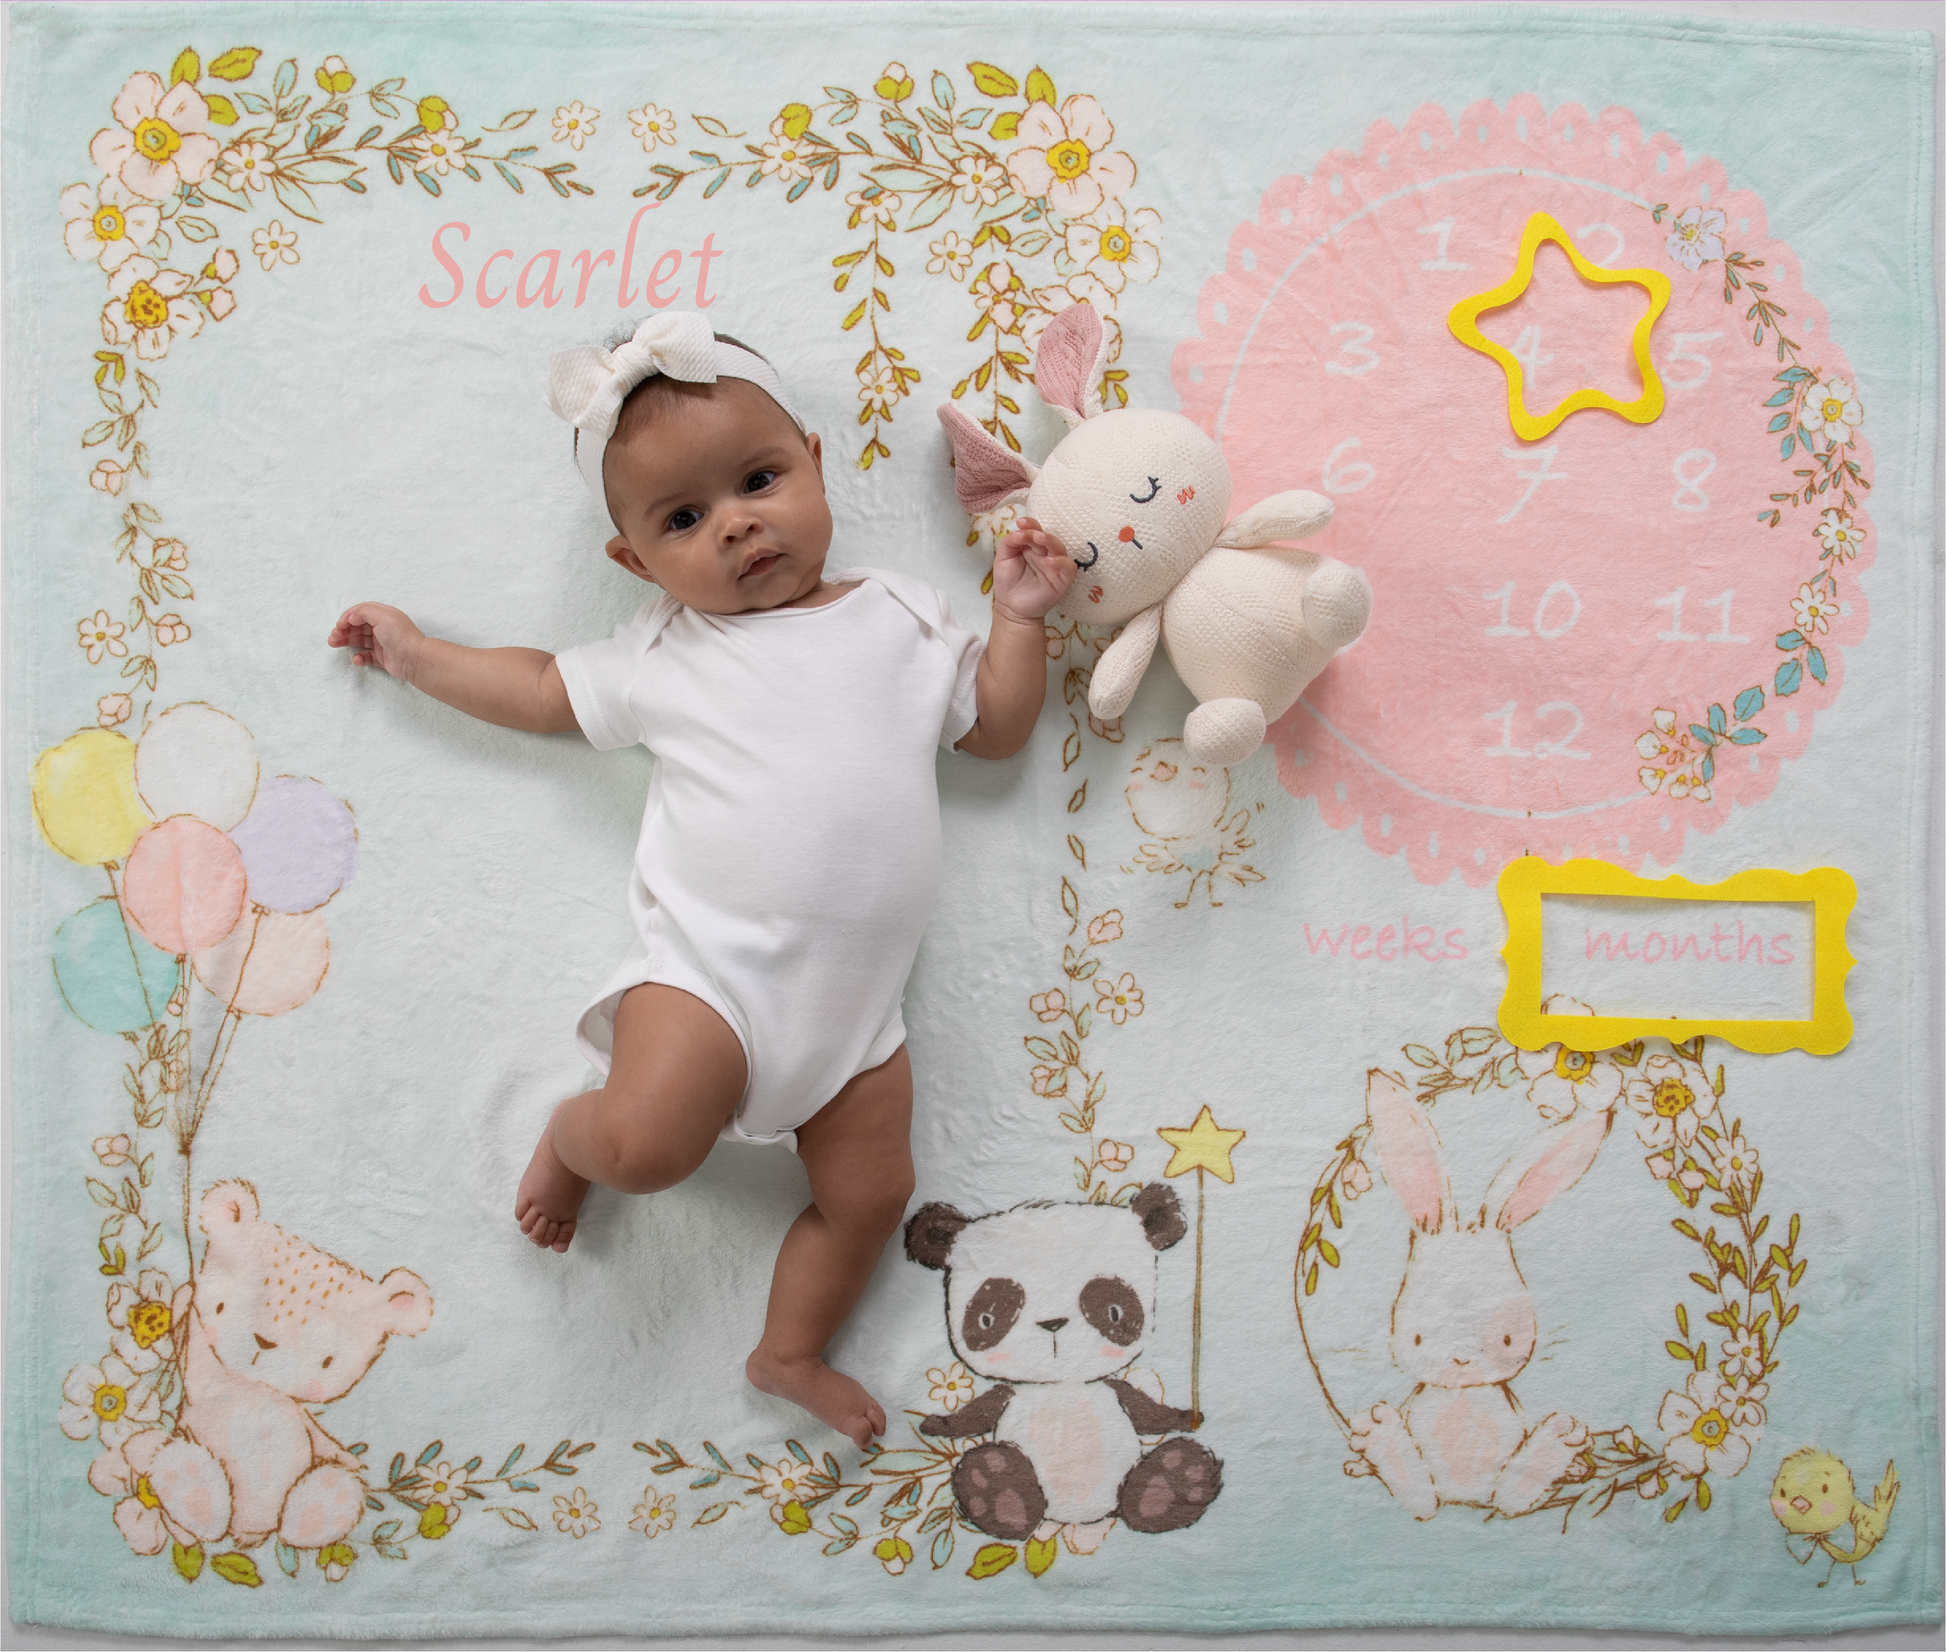 Capture your baby's growth and development with our soft and cozy bunny and friends floral garden milestone blanket. It's perfect for monthly photos to track your little one's growth and create cherished keepsakes. Baby Milestone Blanket: 39" W x 47" H